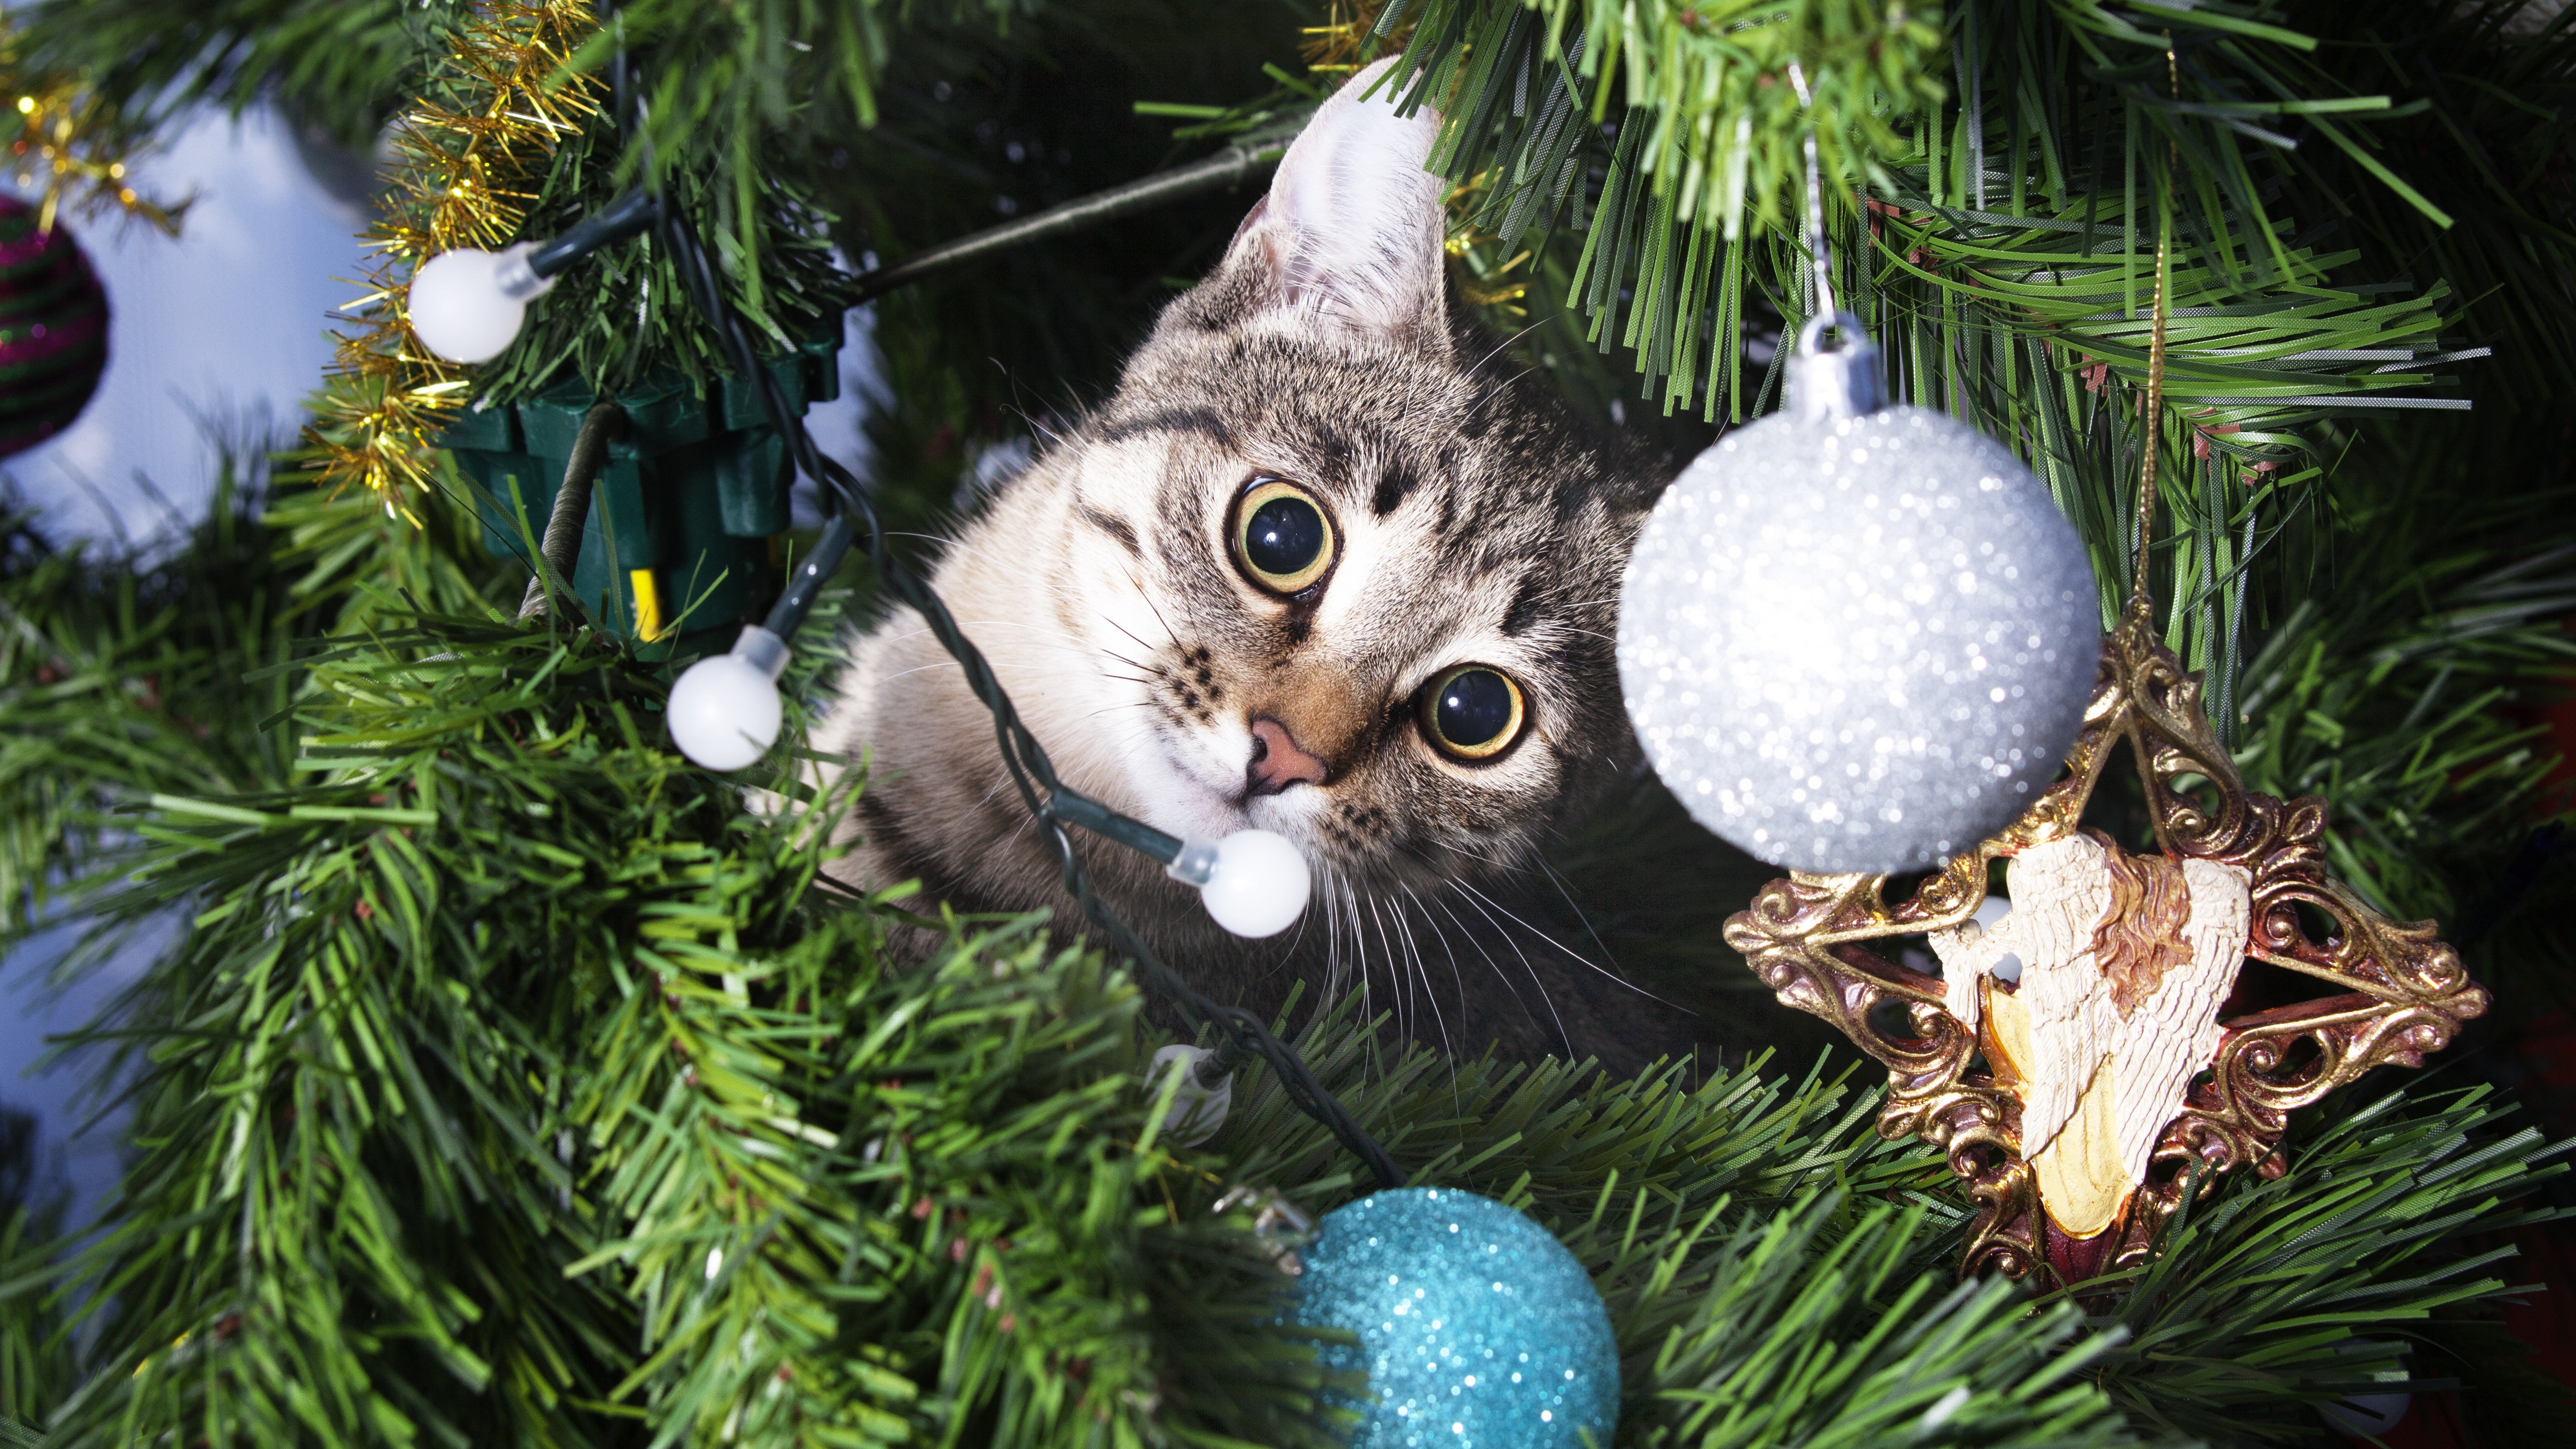 How To Keep A Cat Off A Christmas Tree, According To Reddit